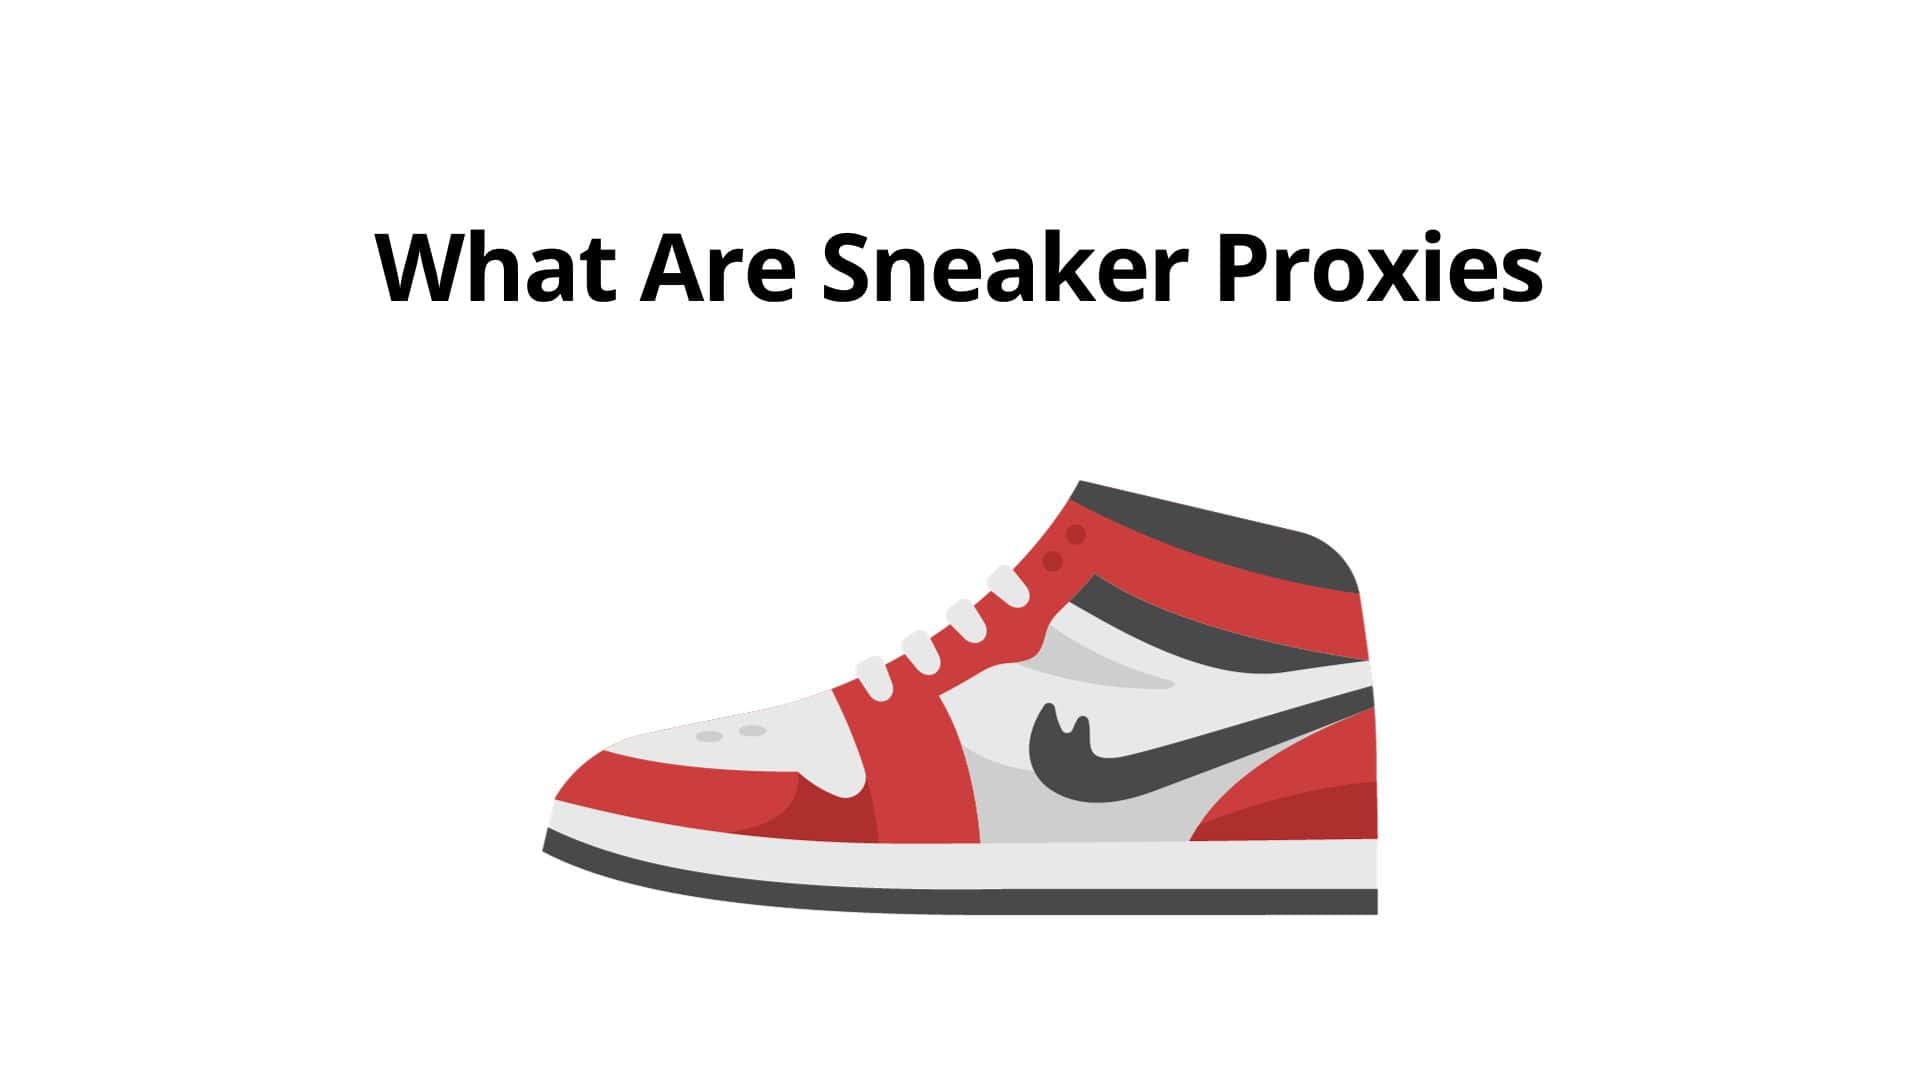 What Are Sneaker Proxies